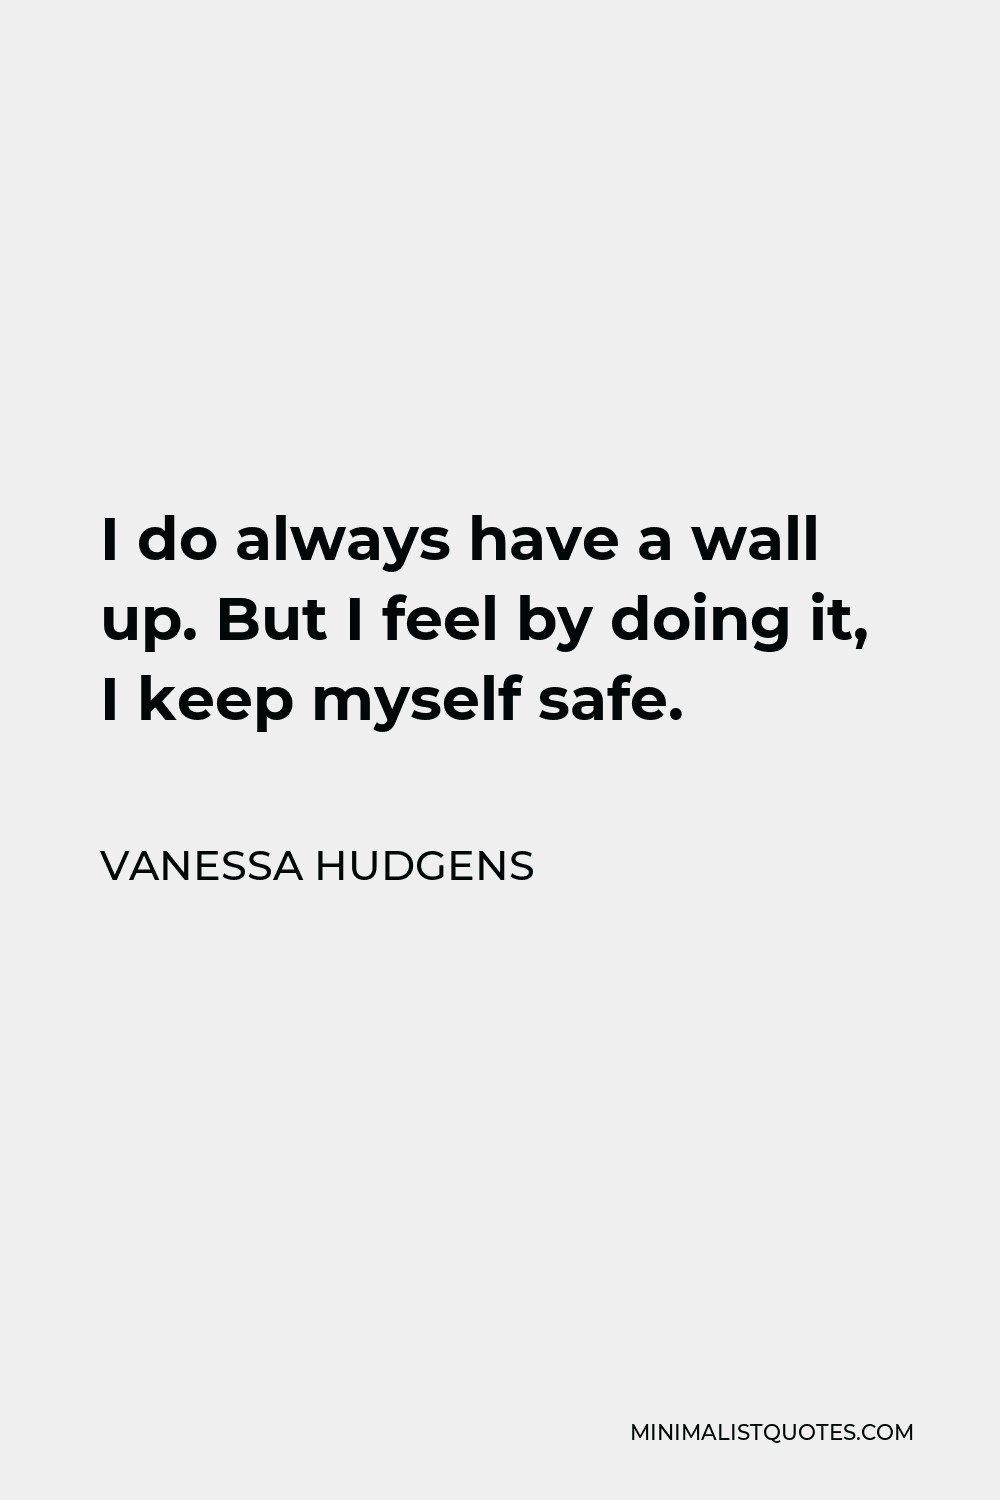 Vanessa Hudgens Quote - I do always have a wall up. But I feel by doing it, I keep myself safe.